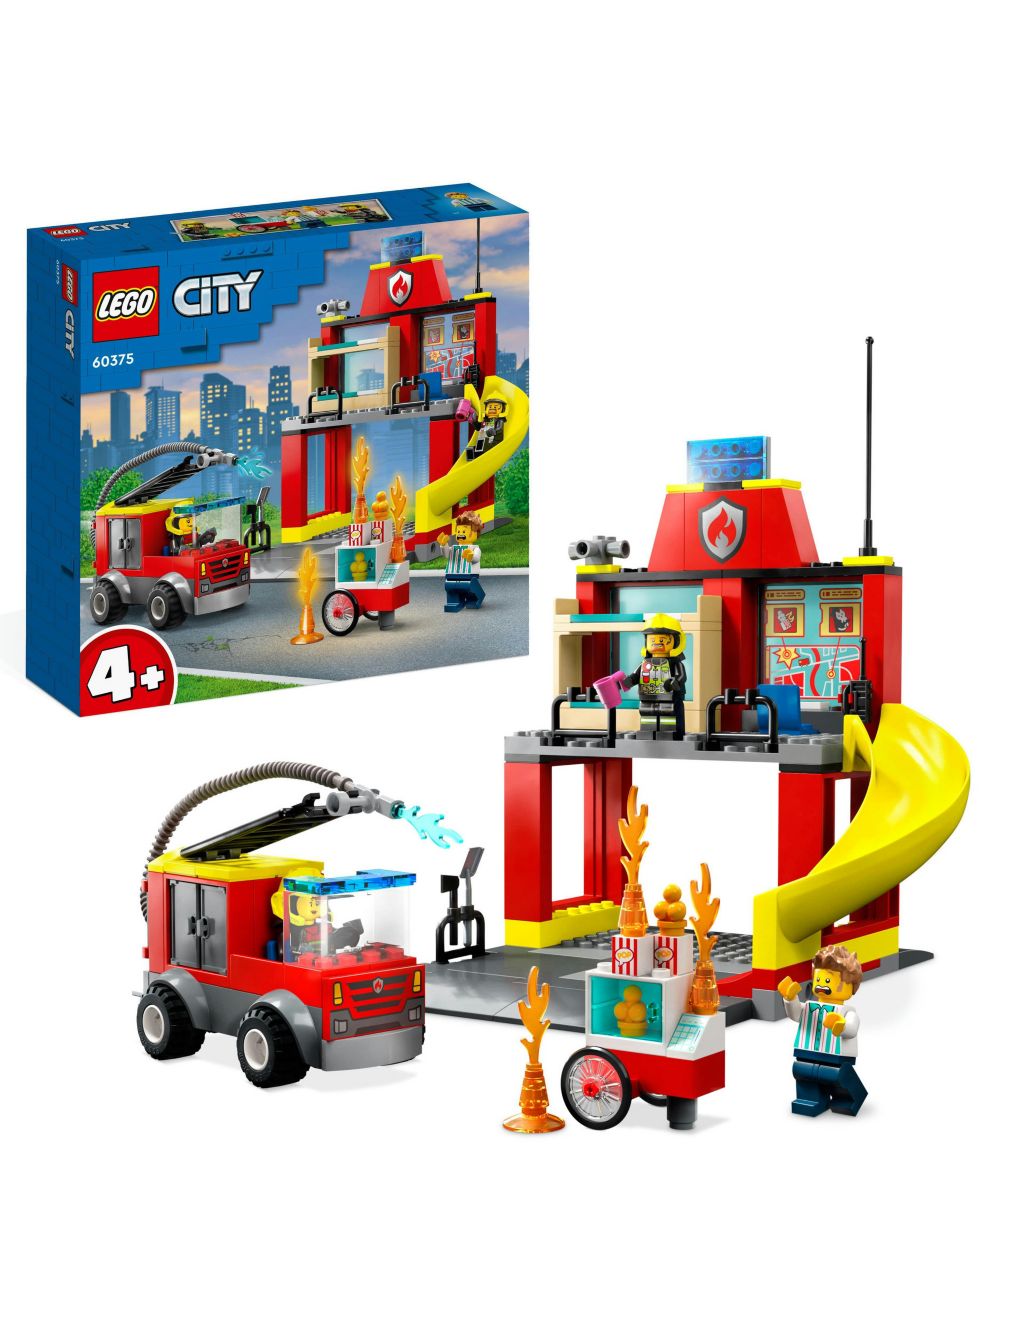 LEGO City Fire Station and Fire Engine Toys (4+ Yrs) image 1